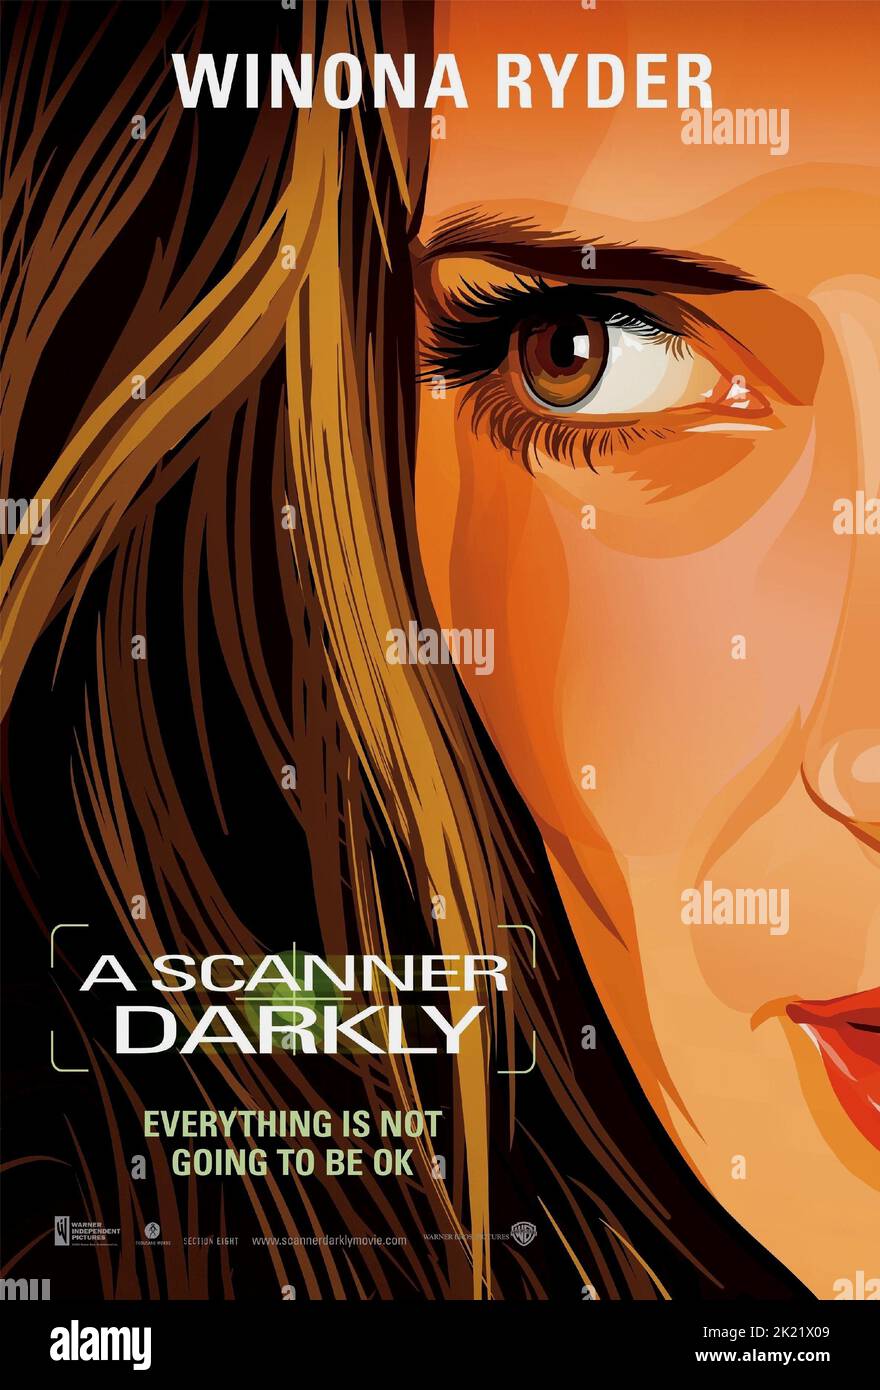 Winona ryder poster scanner darkly hi-res stock photography and images -  Alamy